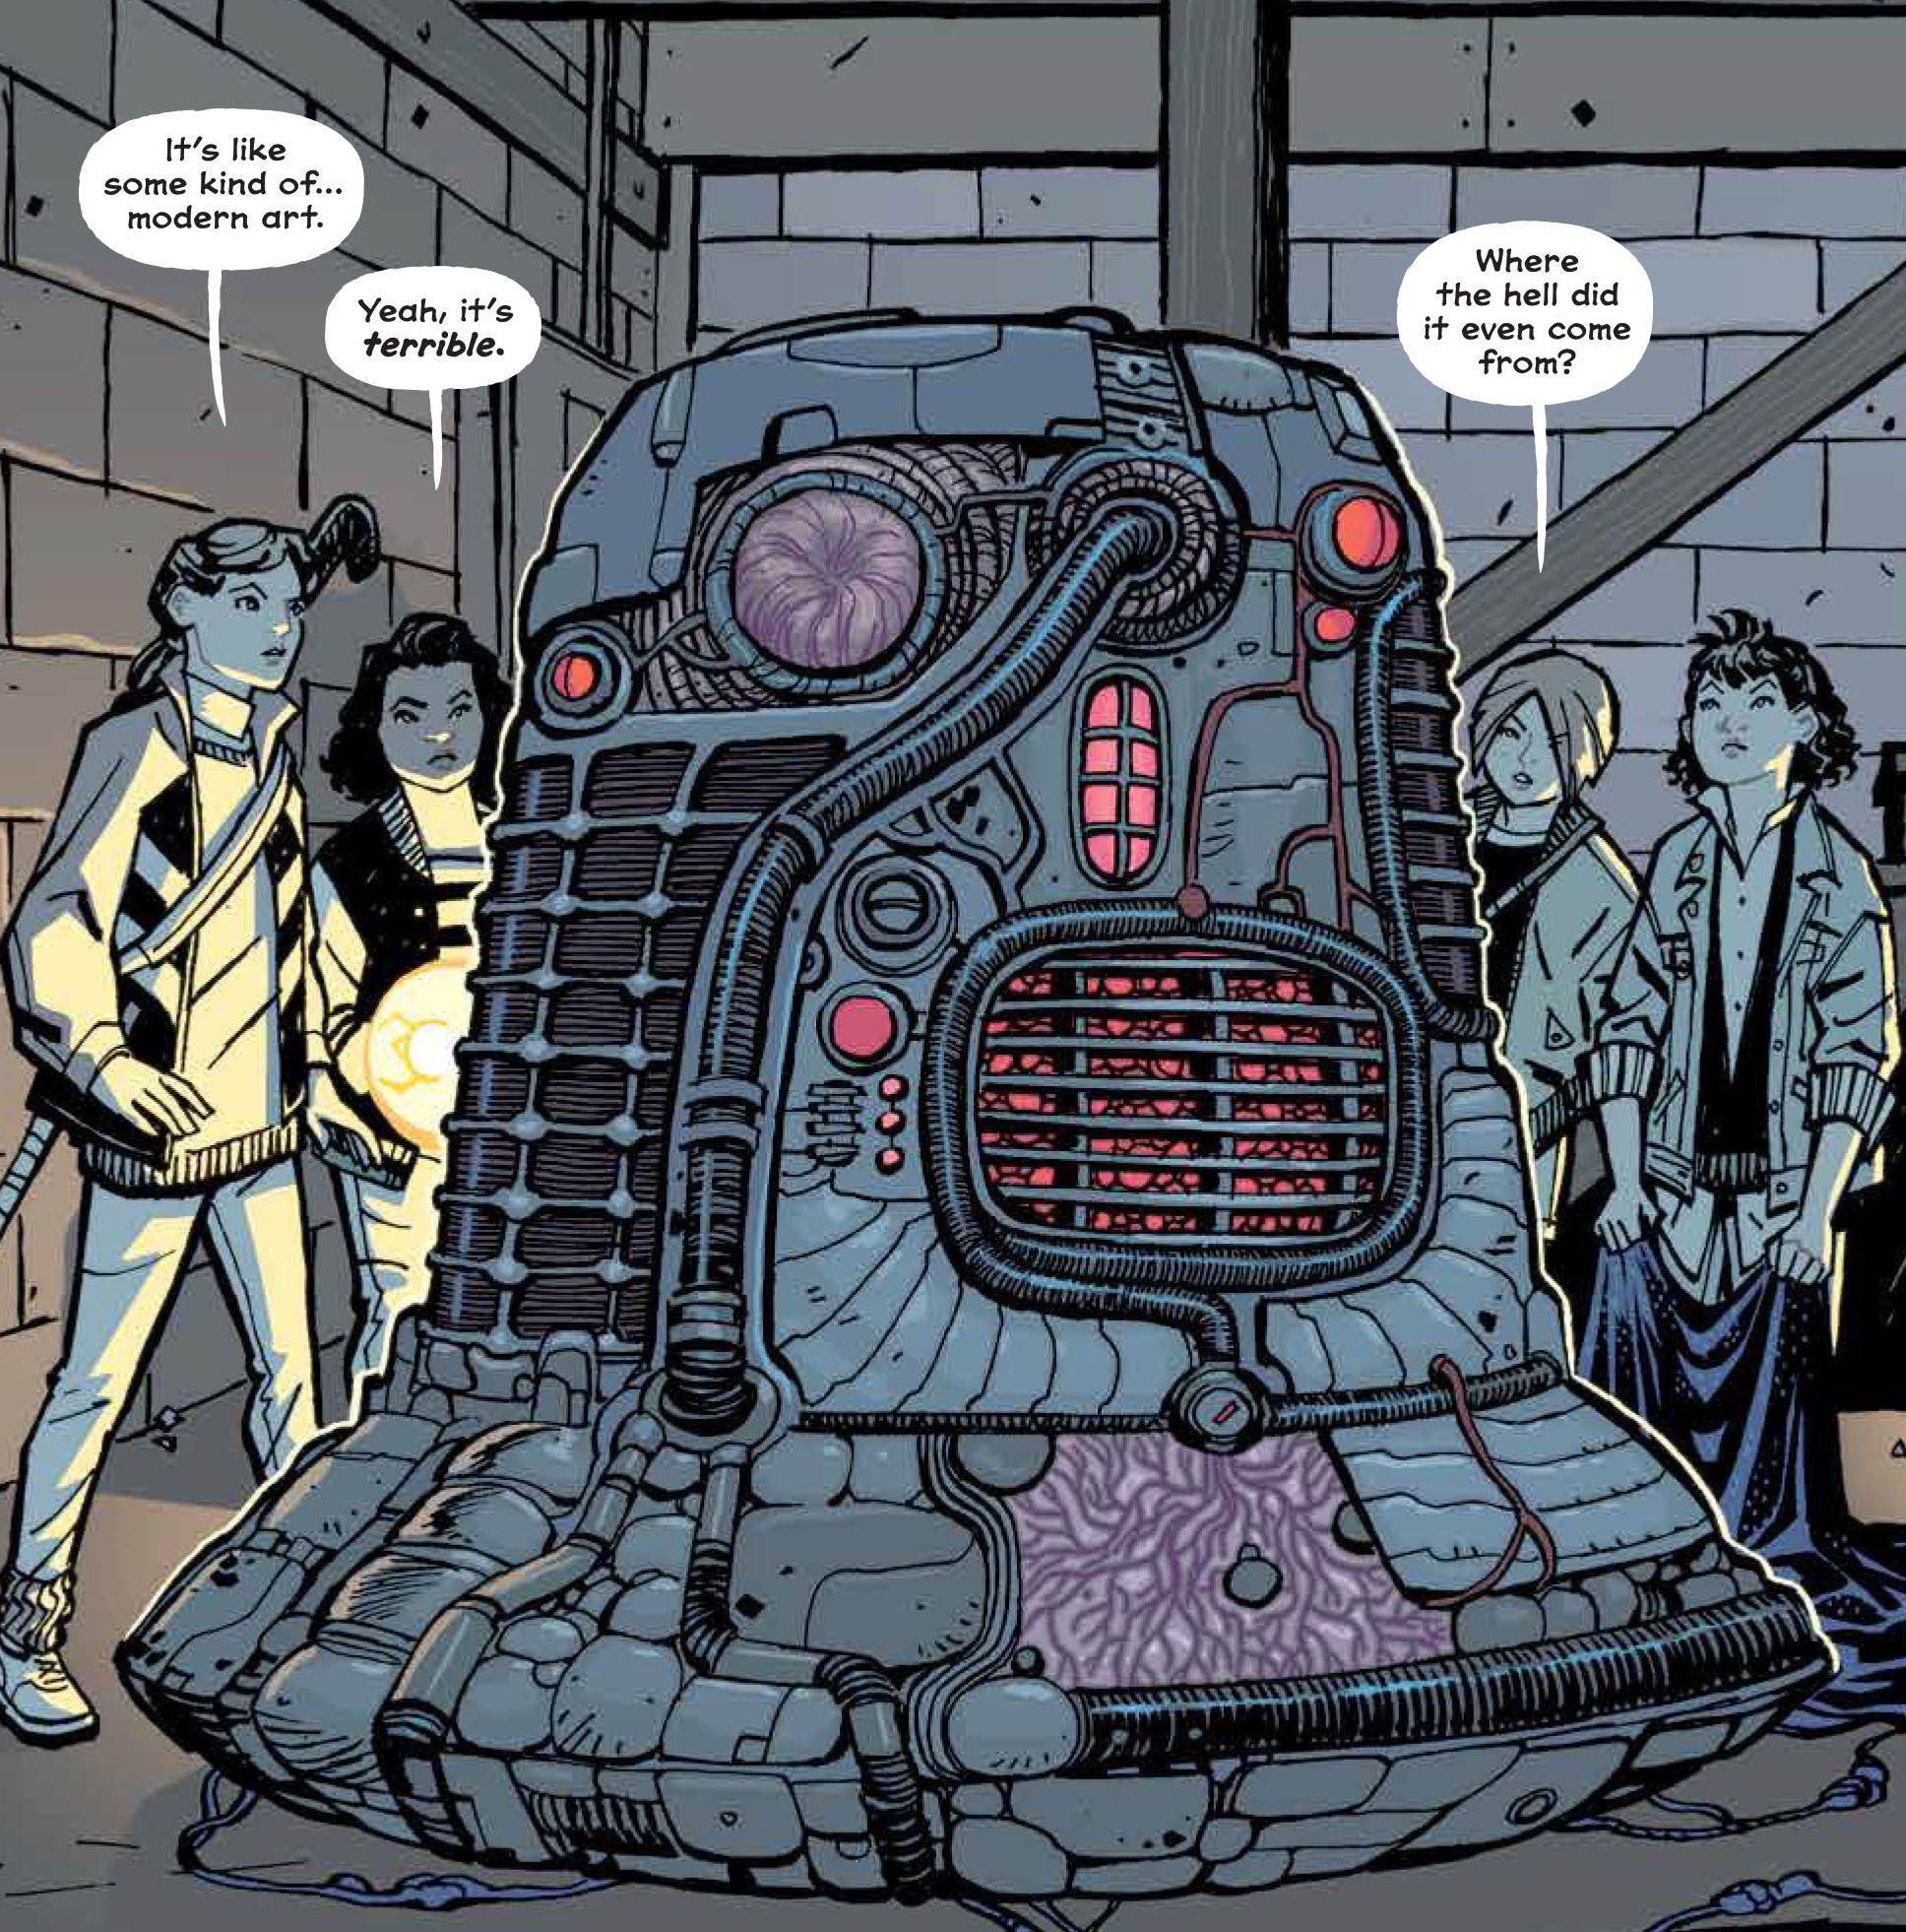 The Paper Girls discover a time machine in a basement